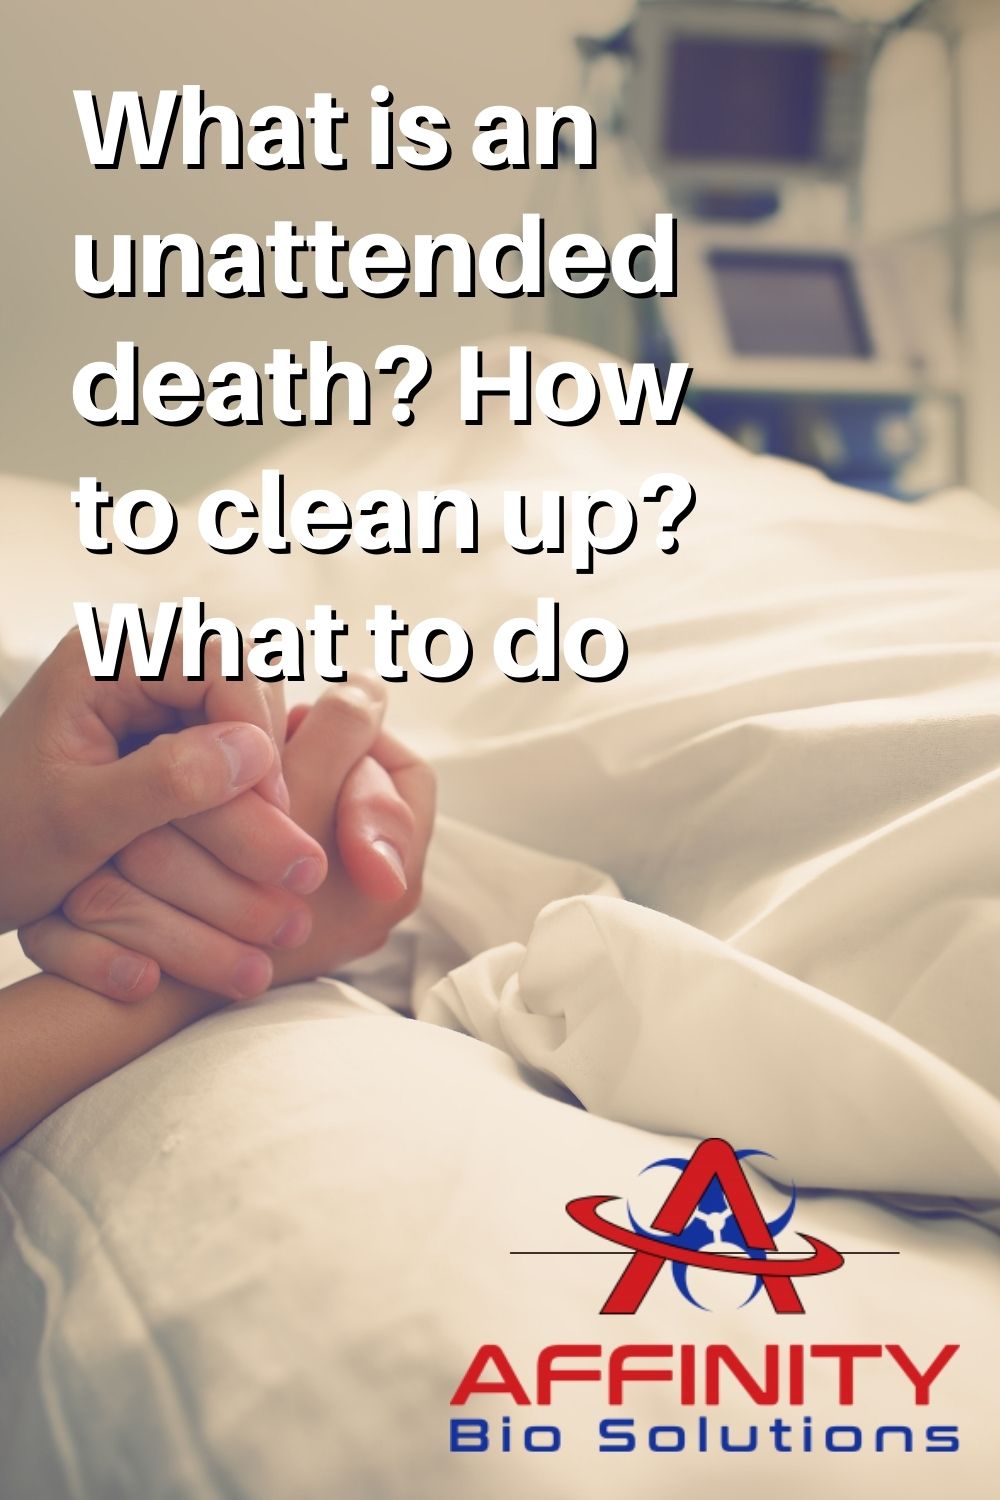 What is an unattended death? How to clean up? What to do